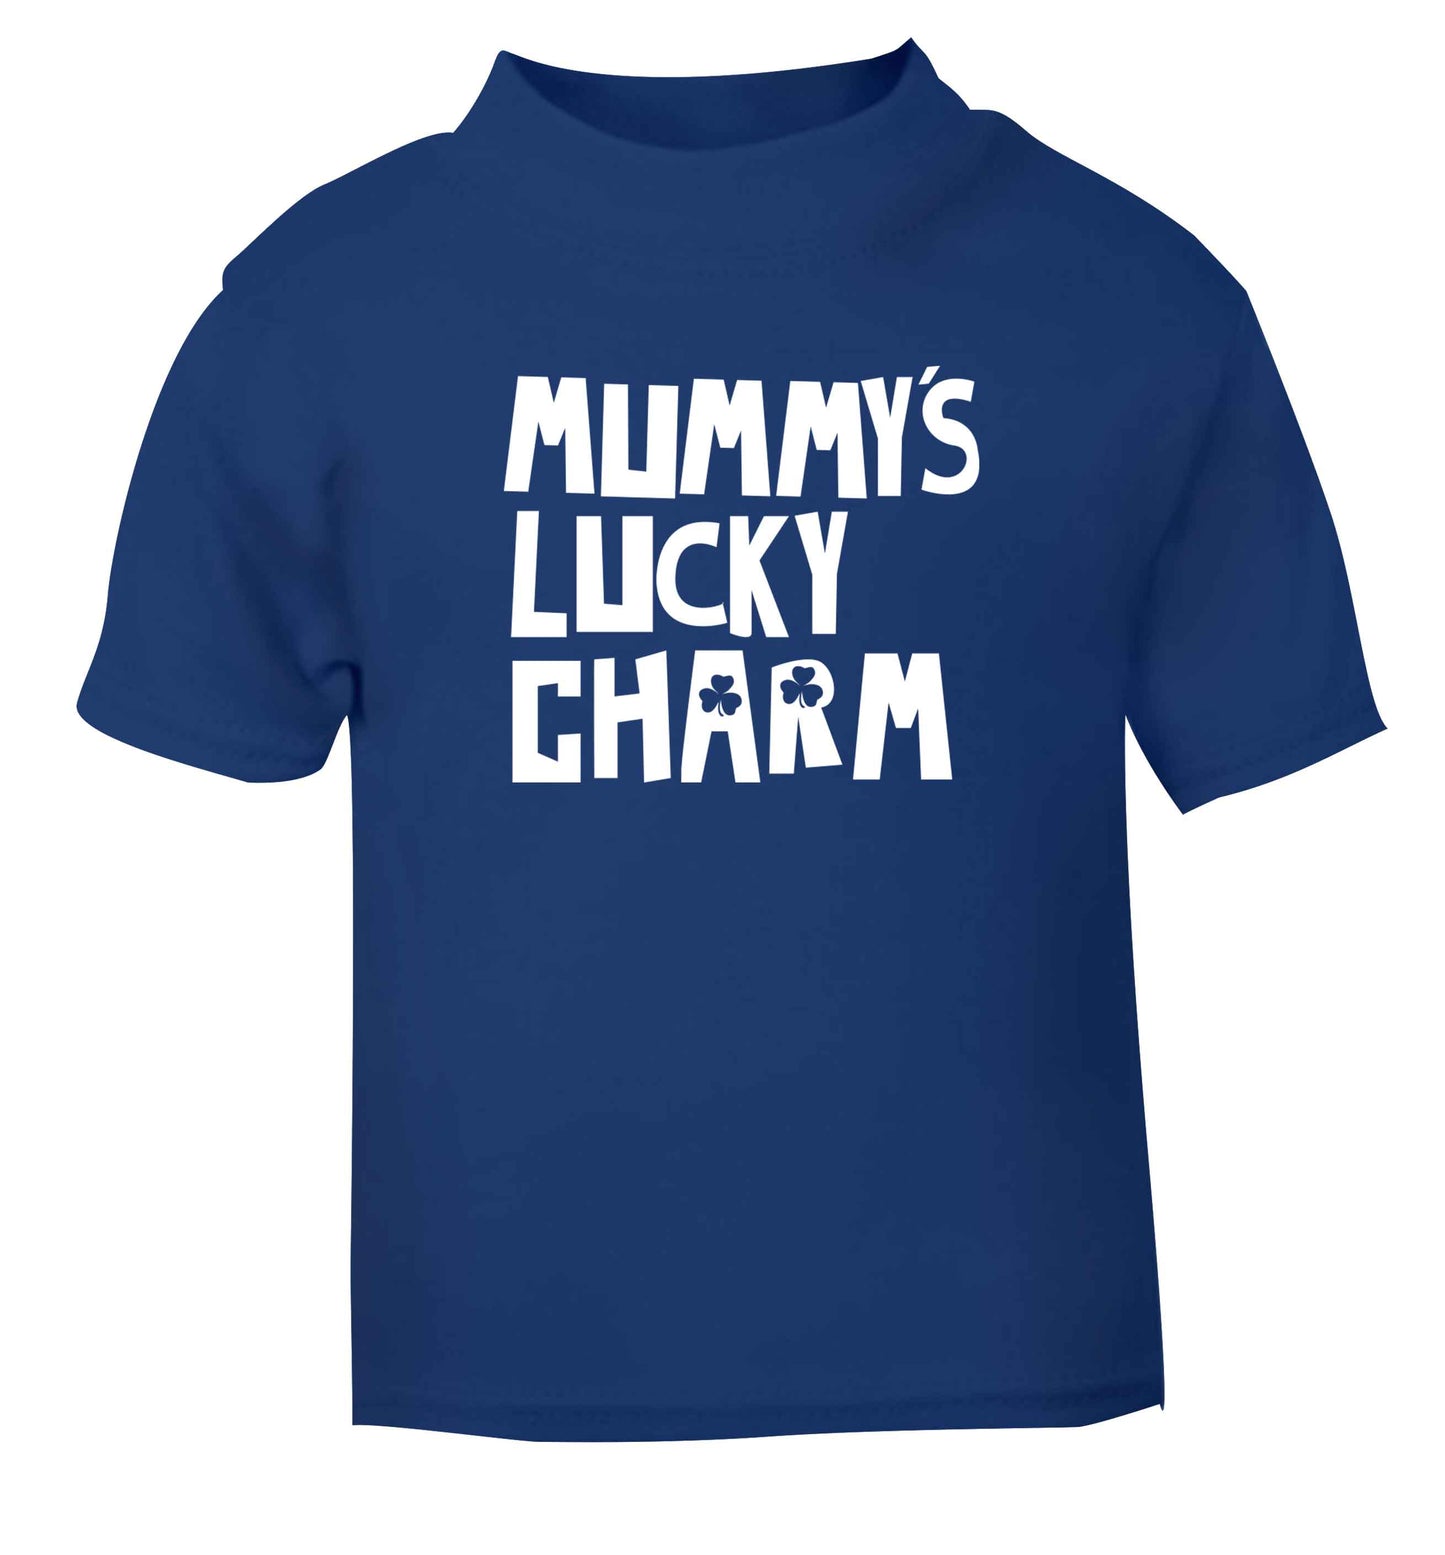 Mummy's lucky charm blue baby toddler Tshirt 2 Years